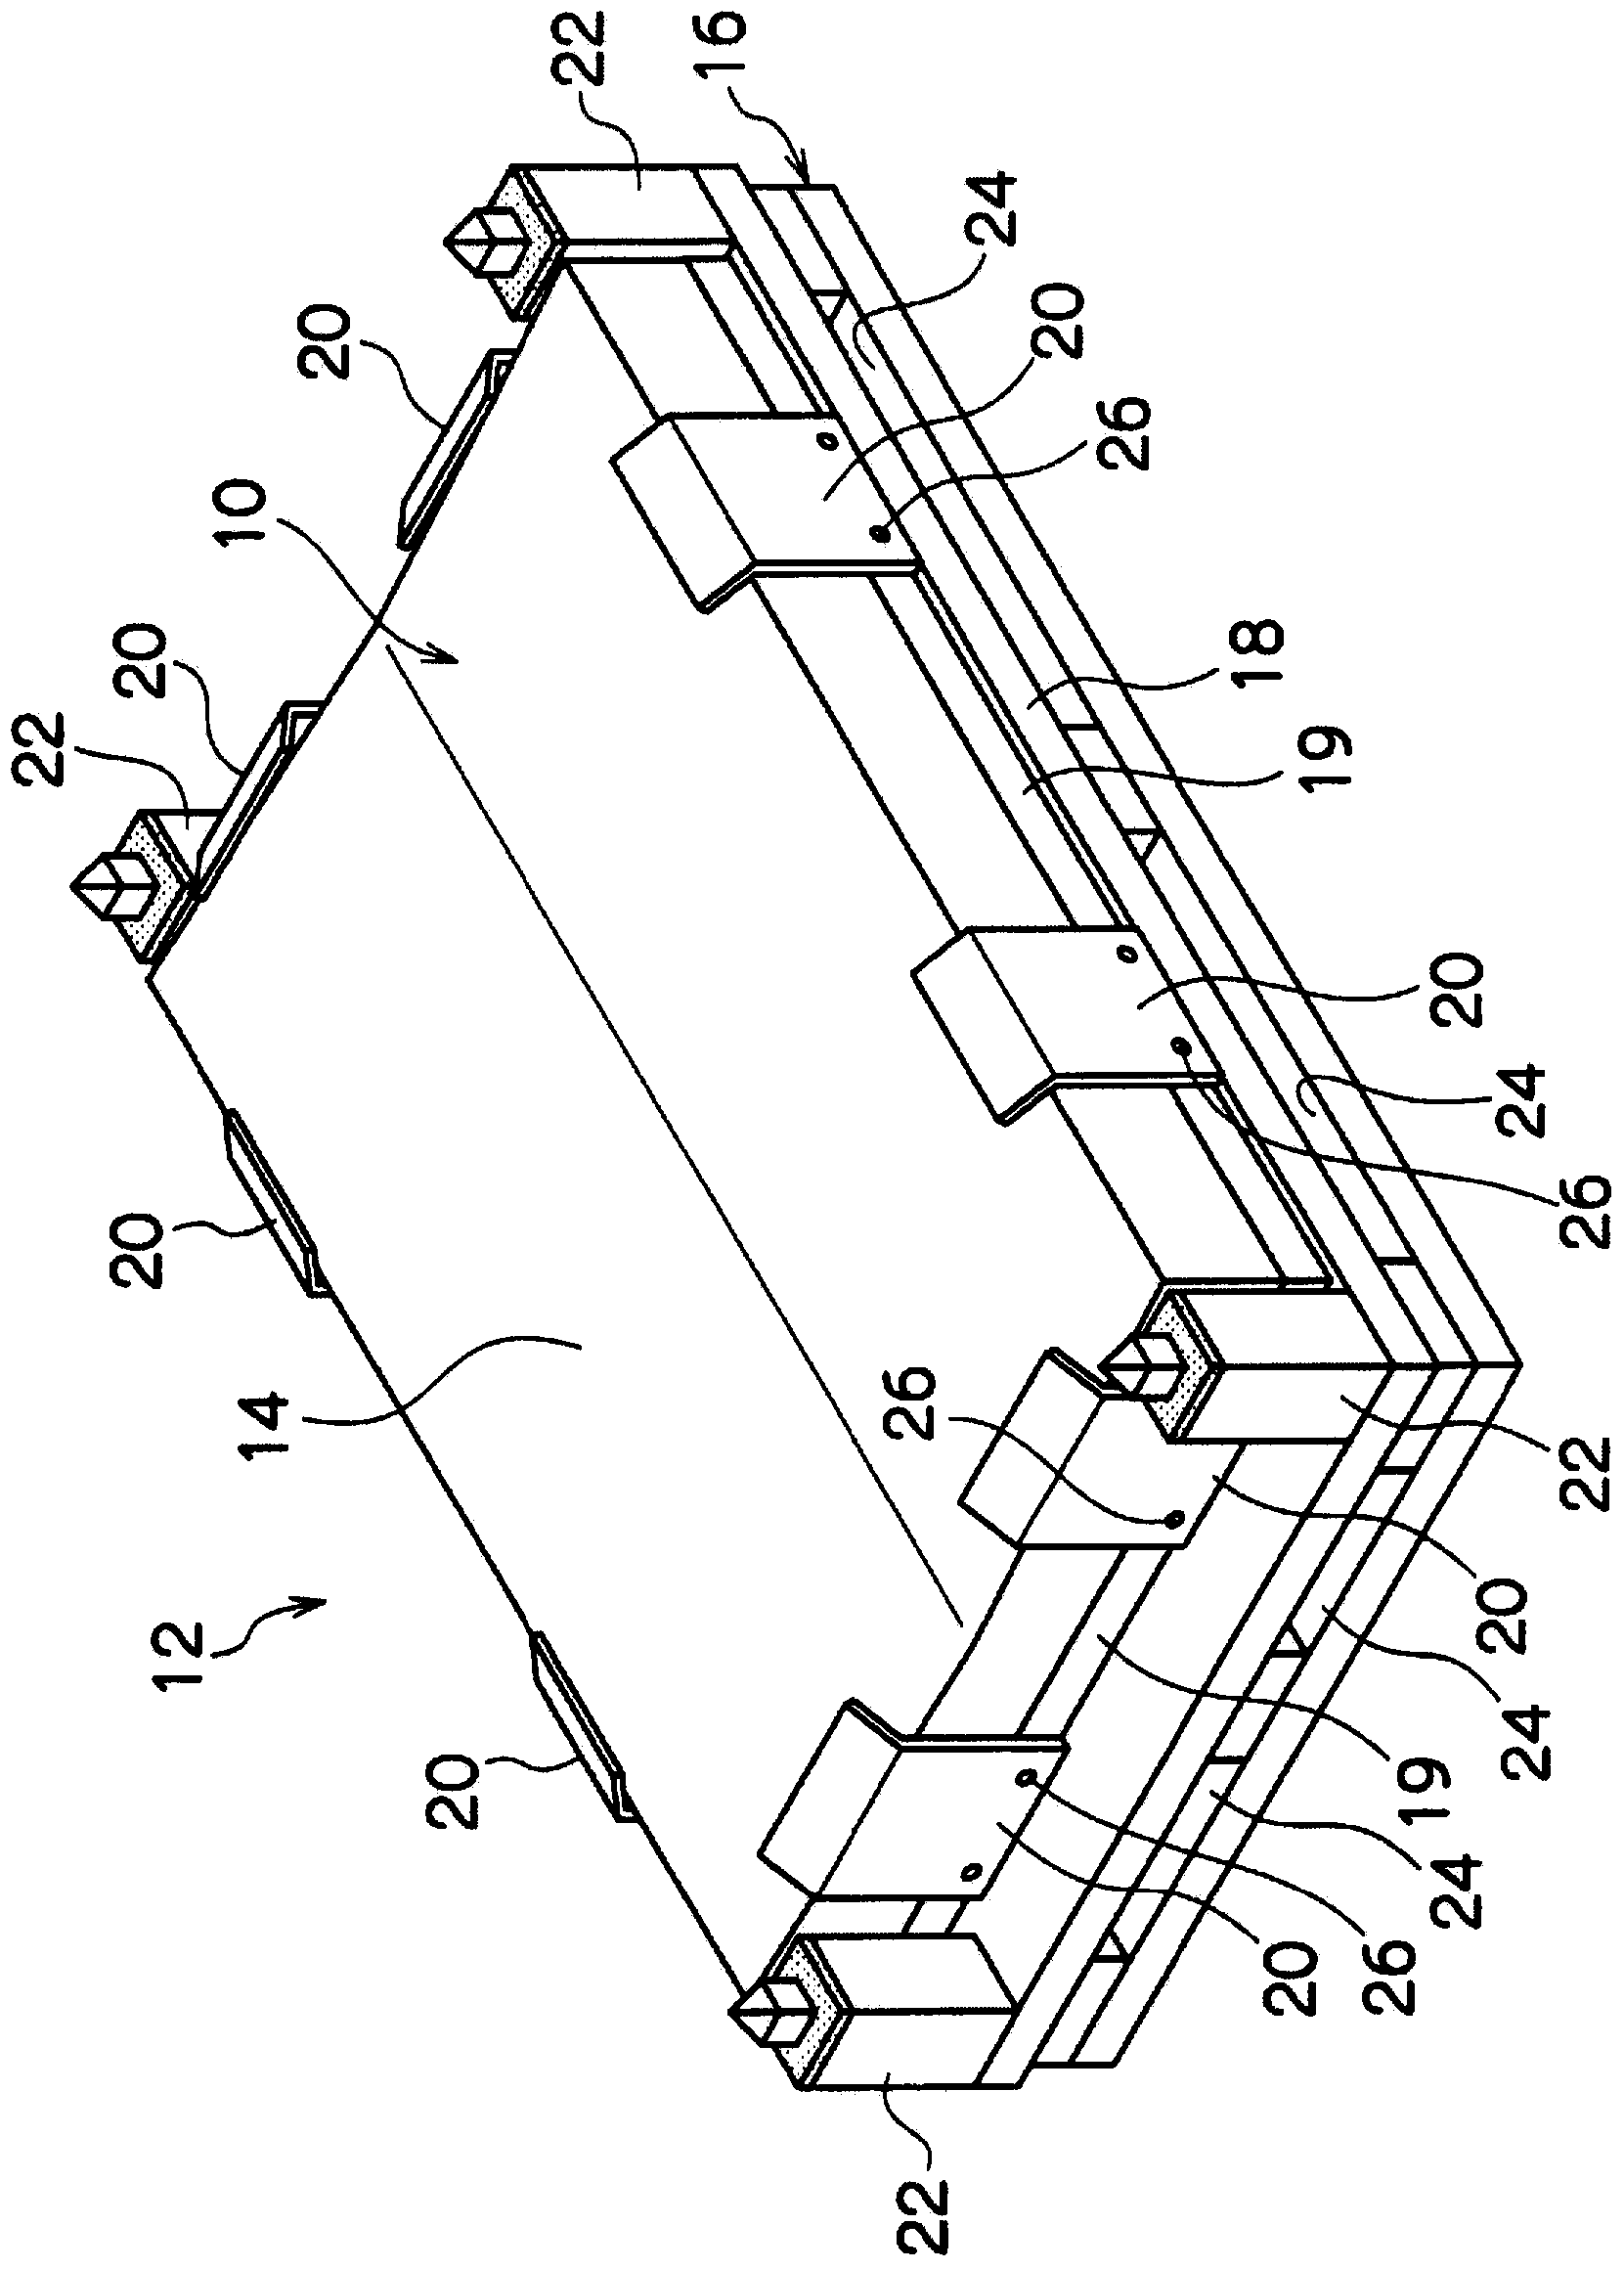 Glass plate stack, and method of extracting glass plate